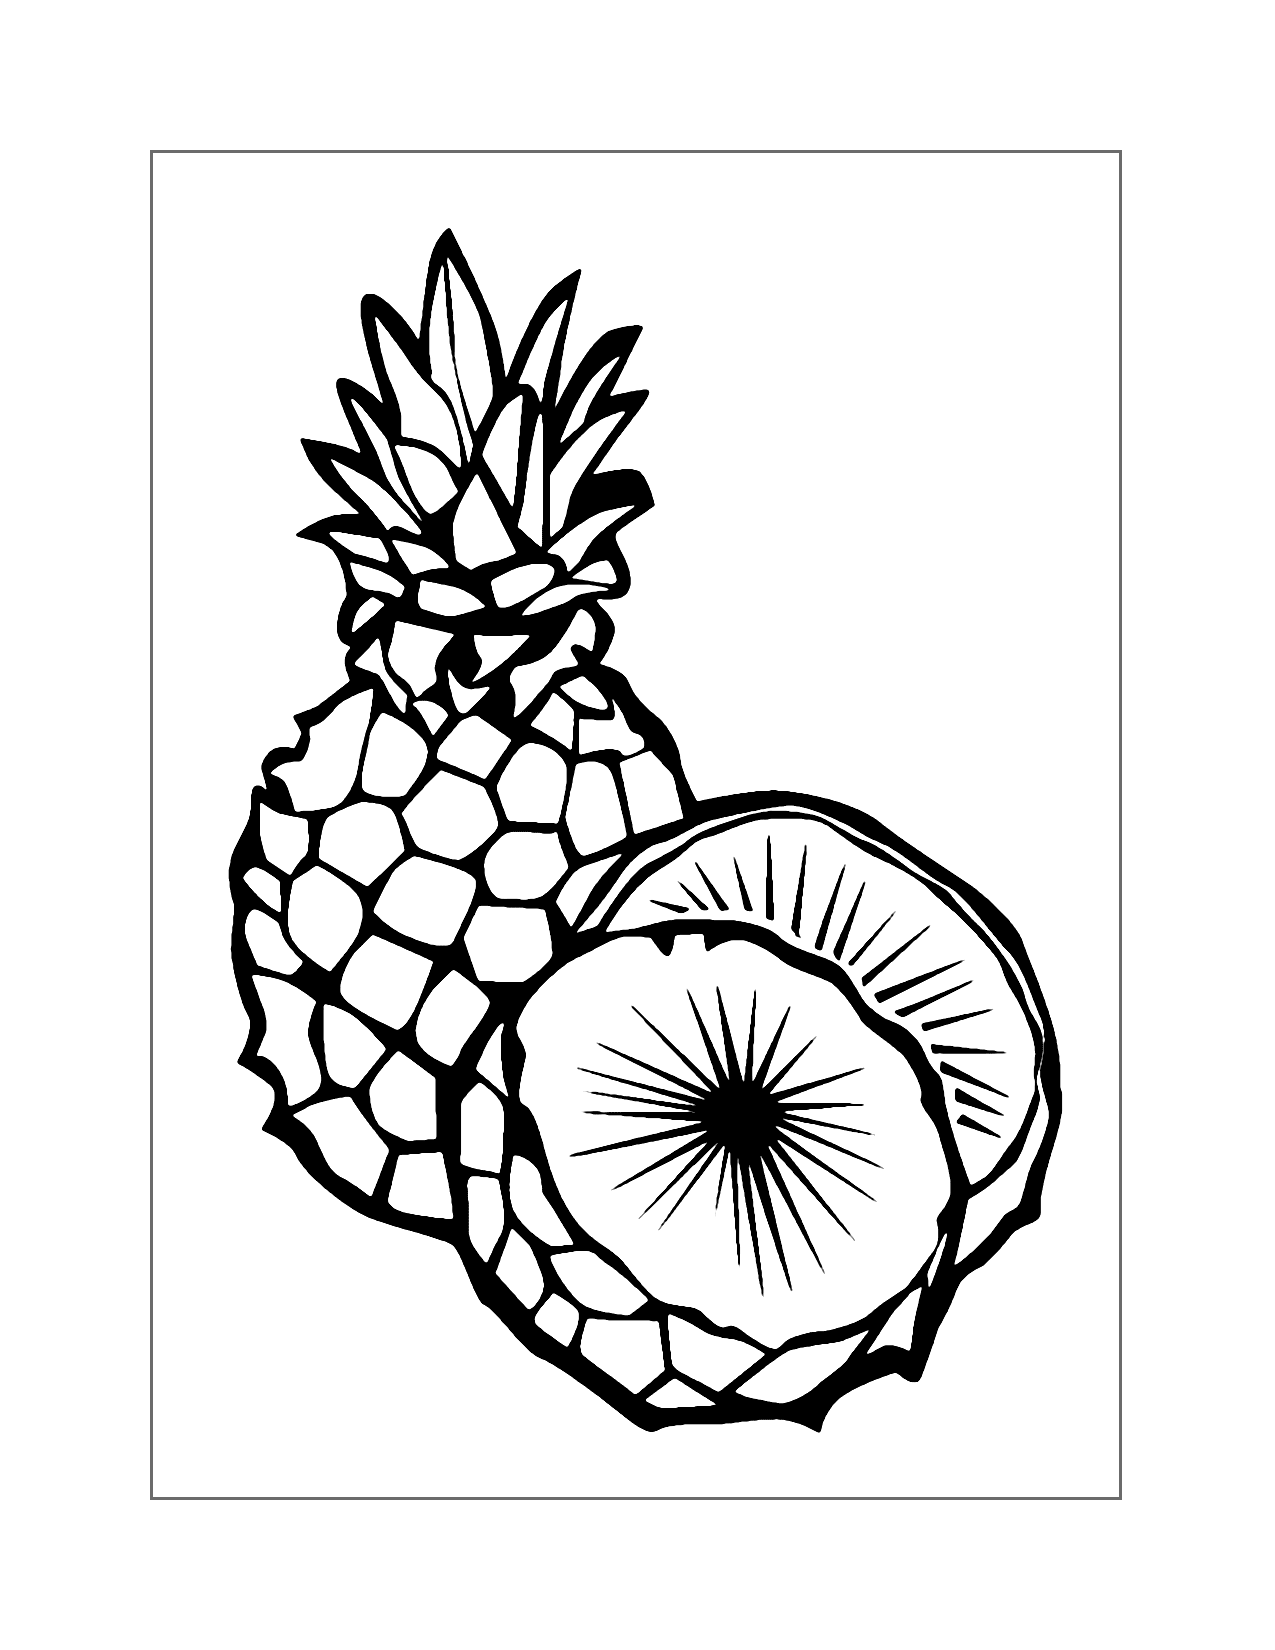 Cut Pineapple Coloring Page